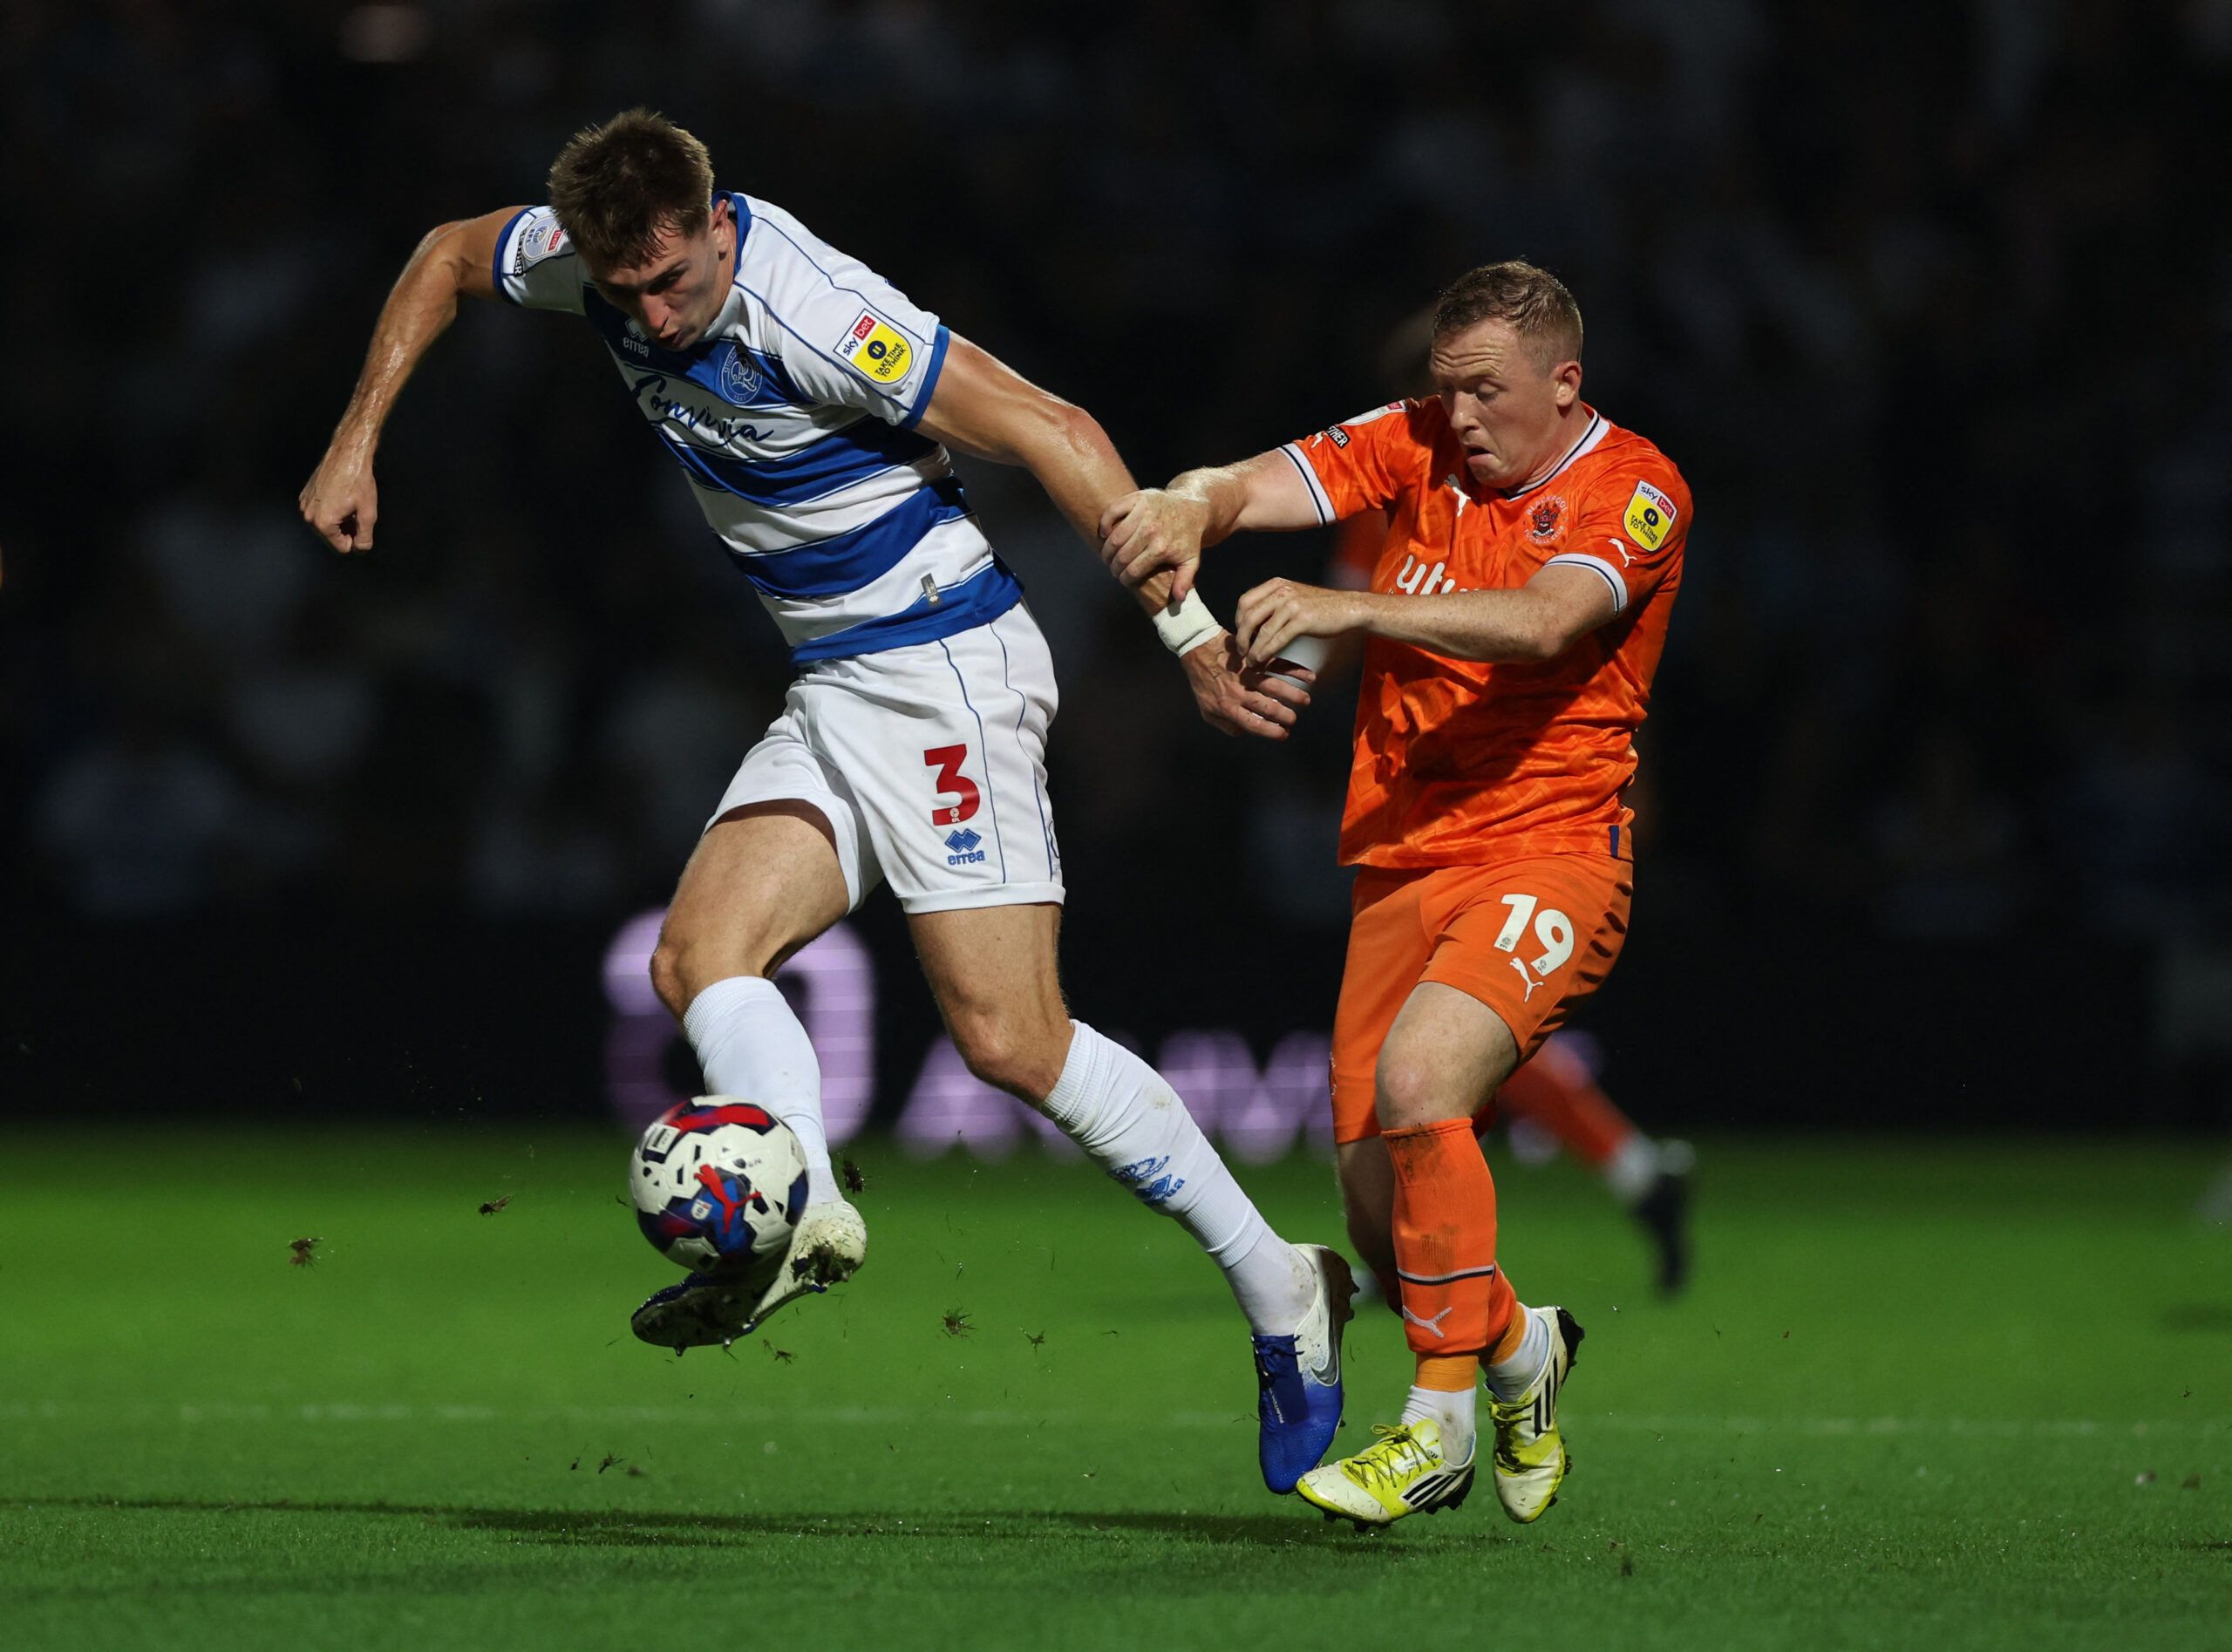 Soccer Football - Championship - Queens Park Rangers v Blackpool - Loftus Road, London, Britain - August 16, 2022 Queens Park Rangers' Jimmy Dunne in action with Blackpool's Shayne Lavery Action Images/Matthew Childs EDITORIAL USE ONLY. No use with unauthorized audio, video, data, fixture lists, club/league logos or 'live' services. Online in-match use limited to 75 images, no video emulation. No use in betting, games or single club /league/player publications.  Please contact your account repre